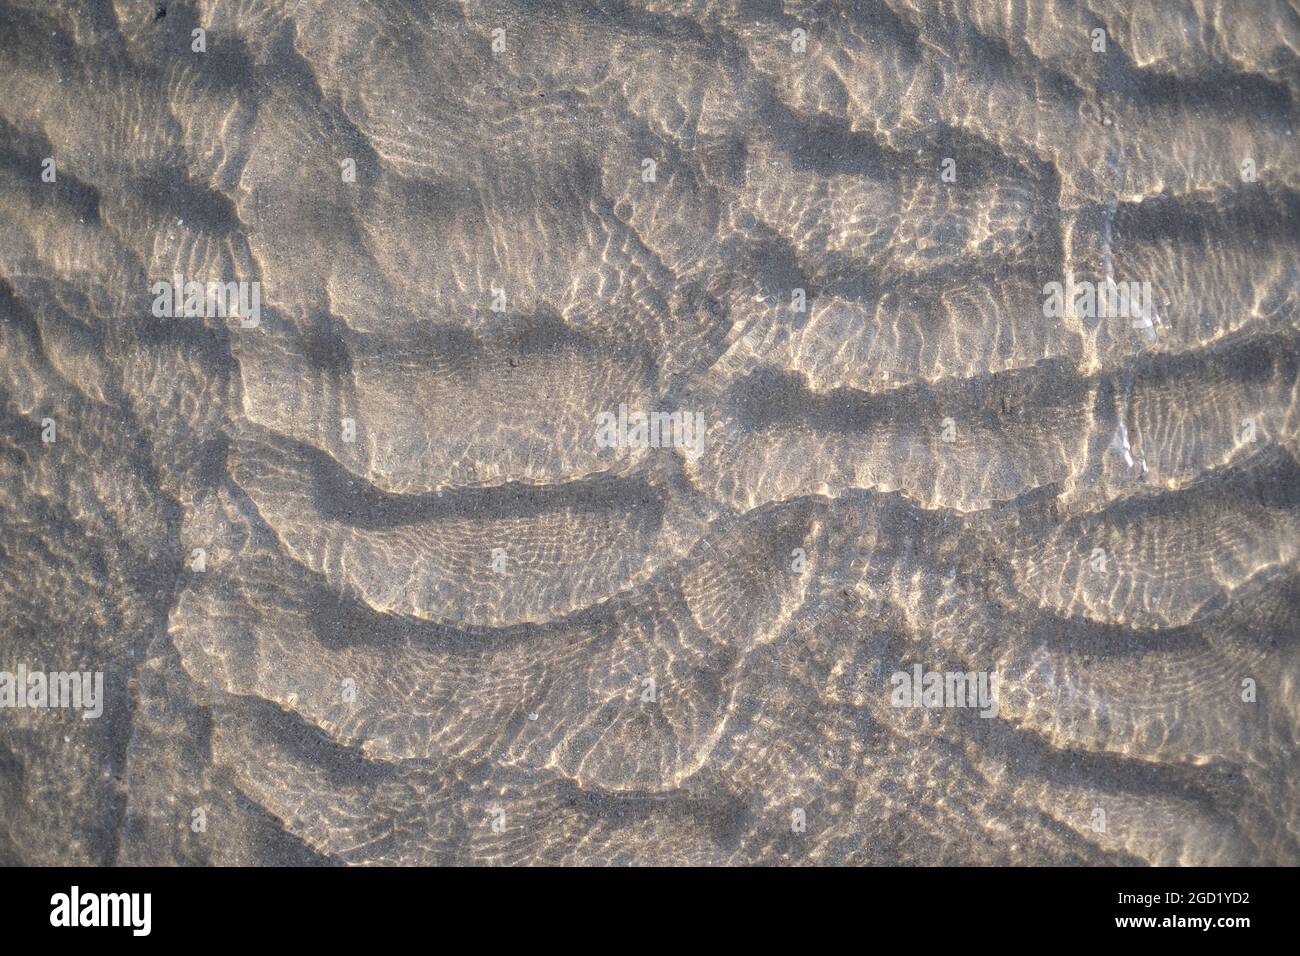 Ripples on a shallow water of the Gulf of Siam Stock Photo